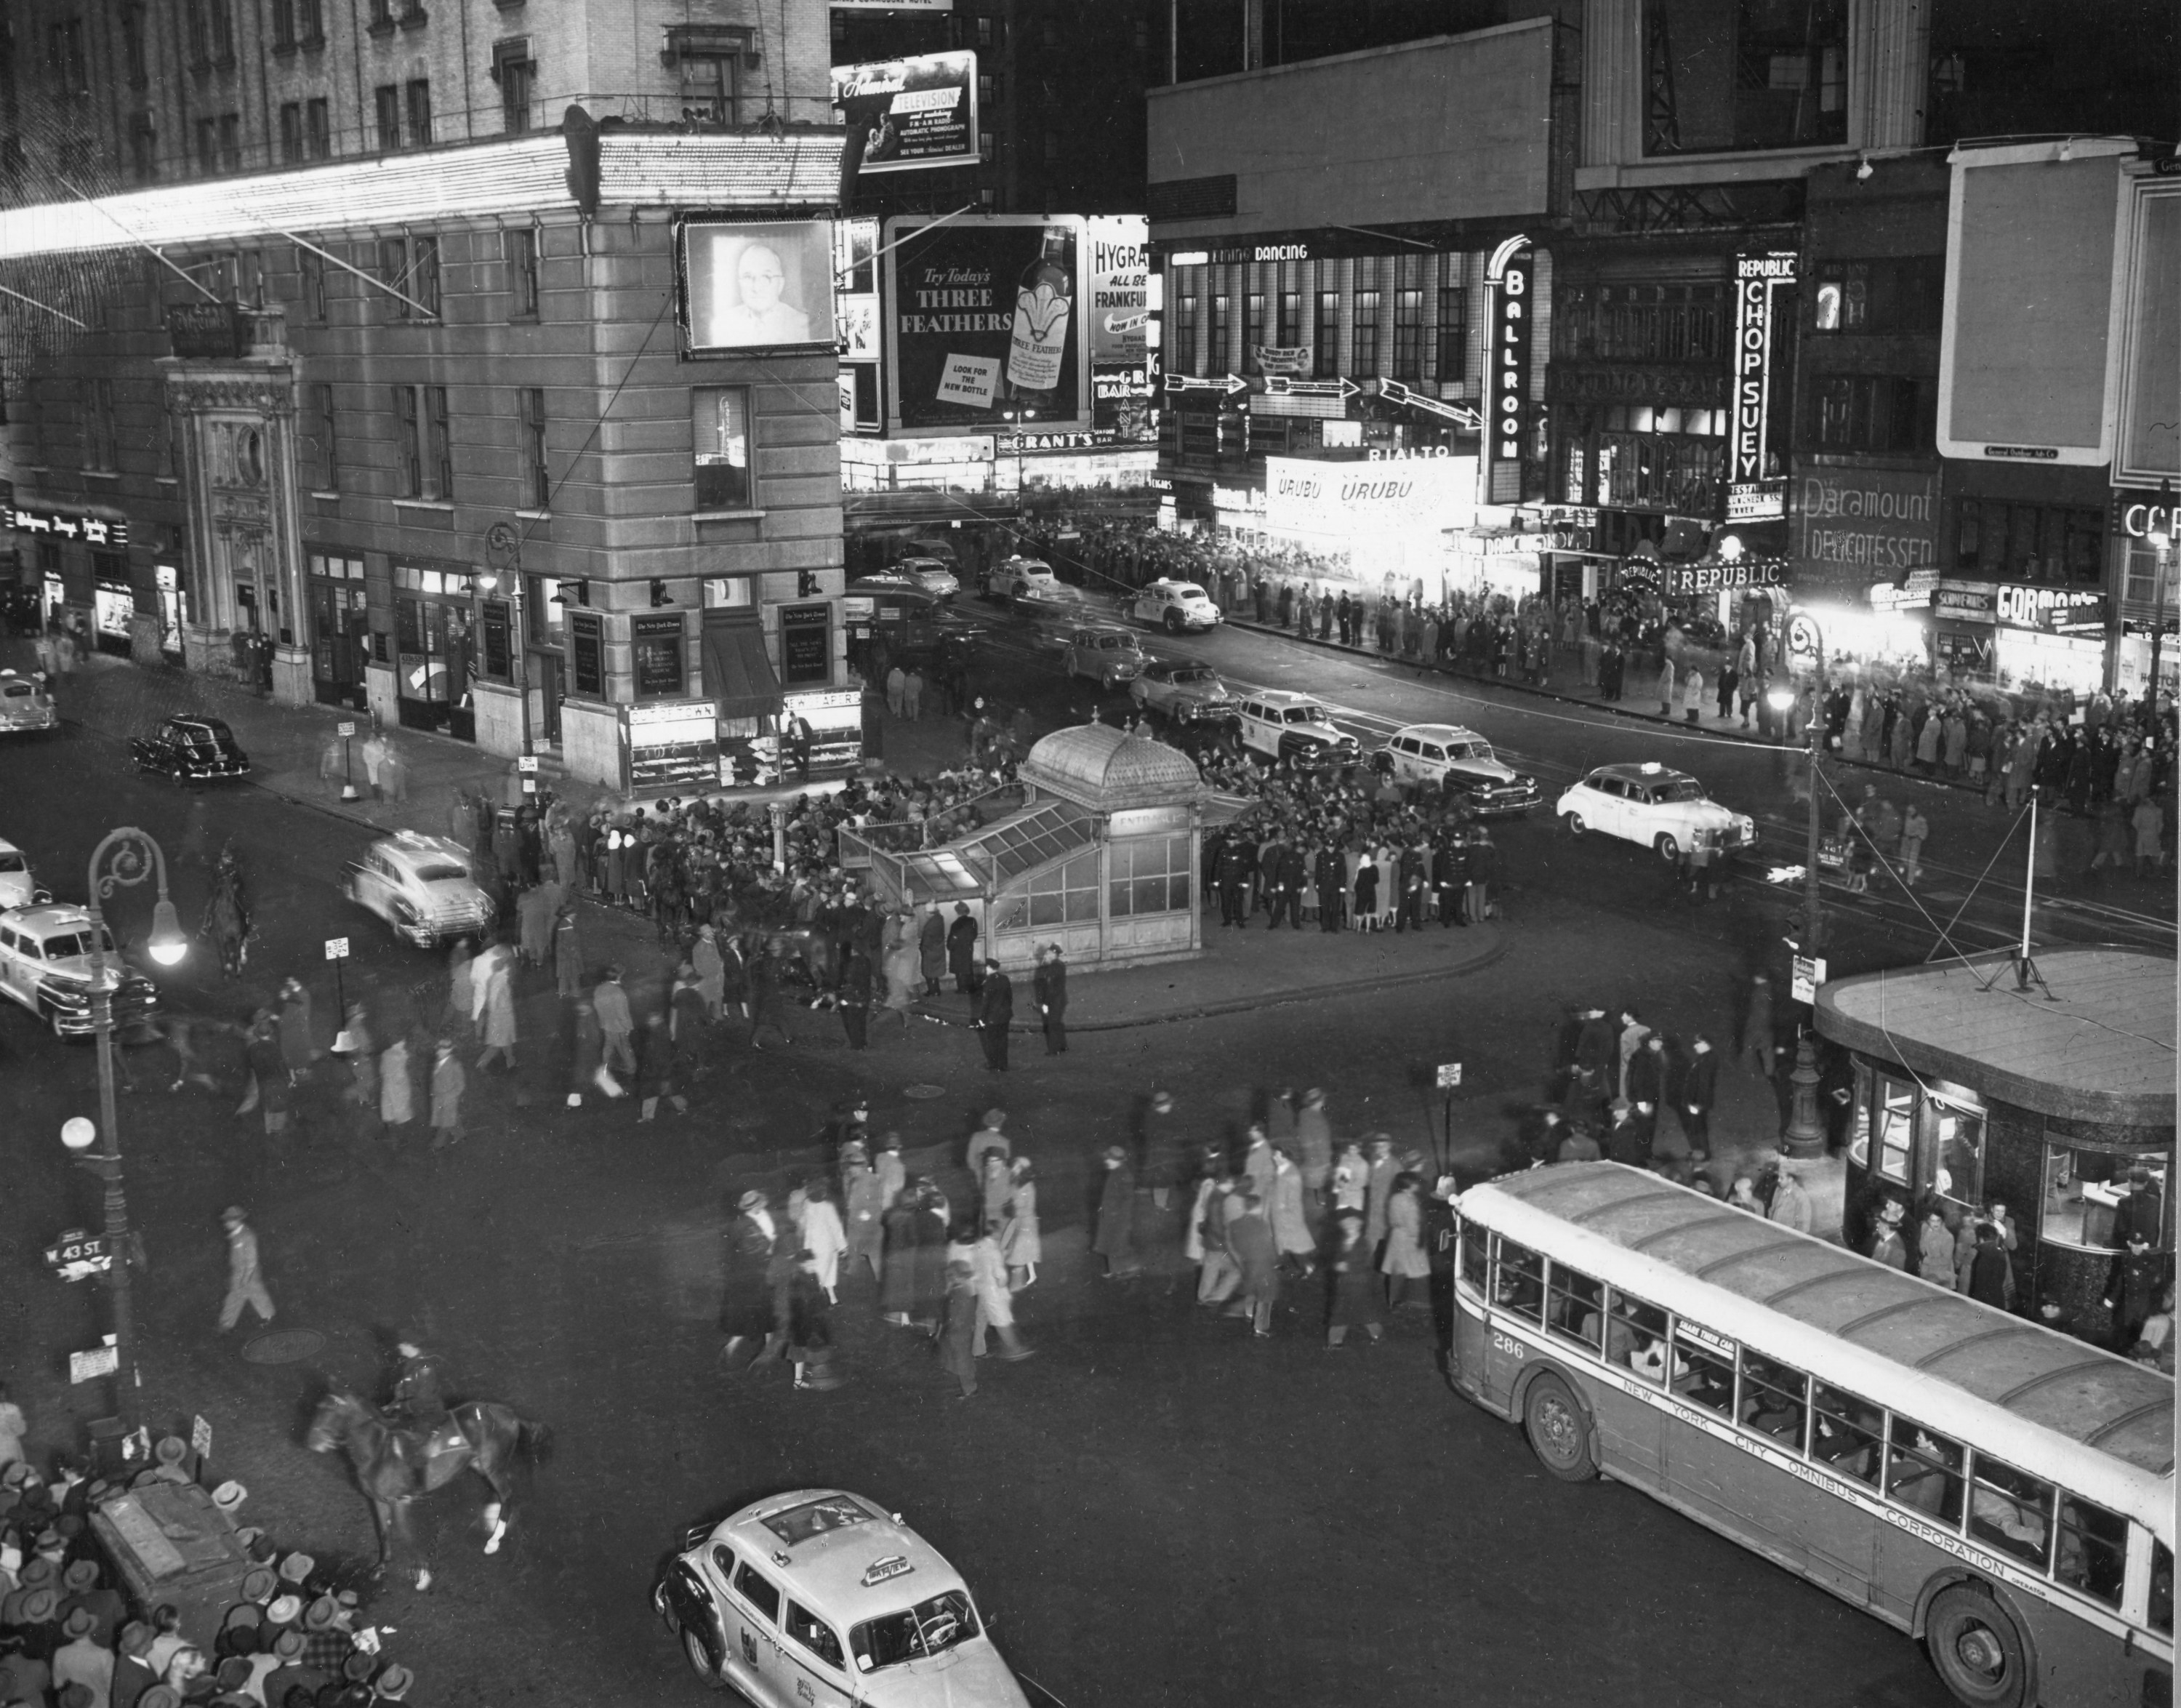 Old Times Square with crowd of people